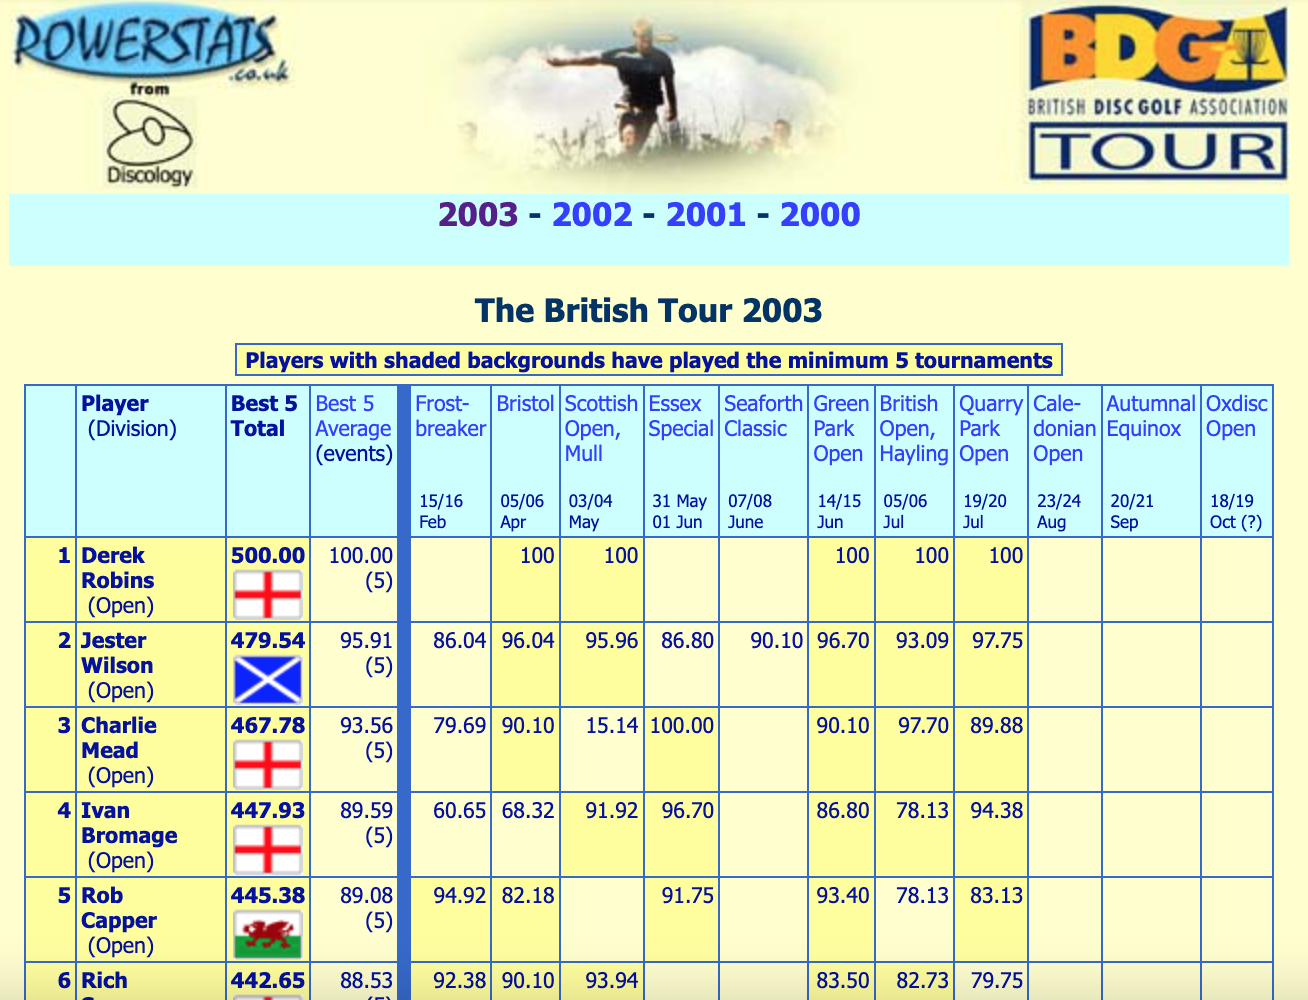 PowerStats - the official record-keeper of the British Disc Golf Association's British Disc Golf Tour points from 2000 to 2003